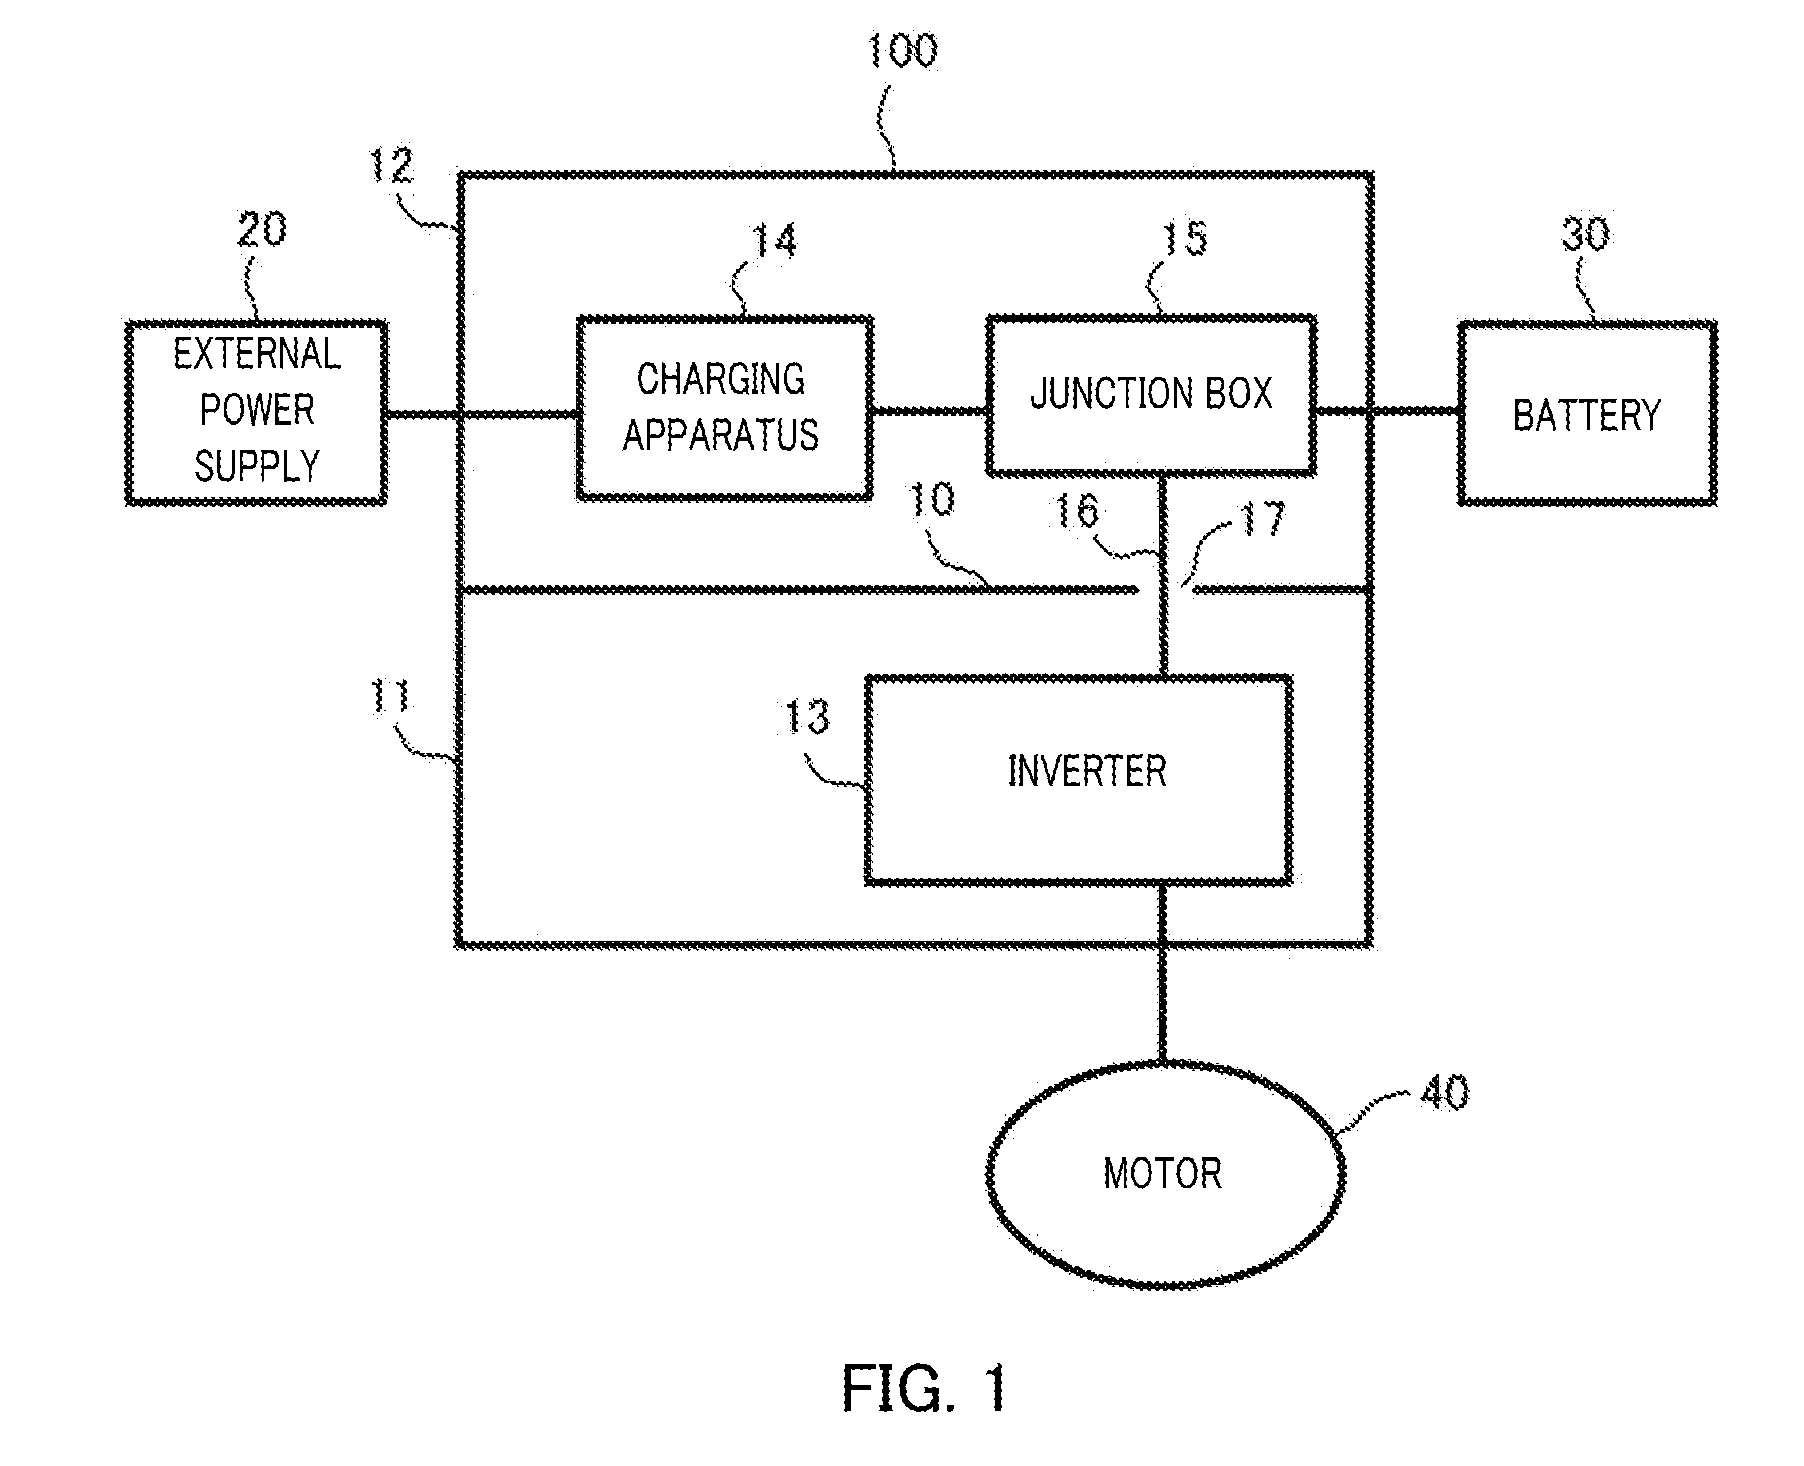 Power conversion apparatus and junction box